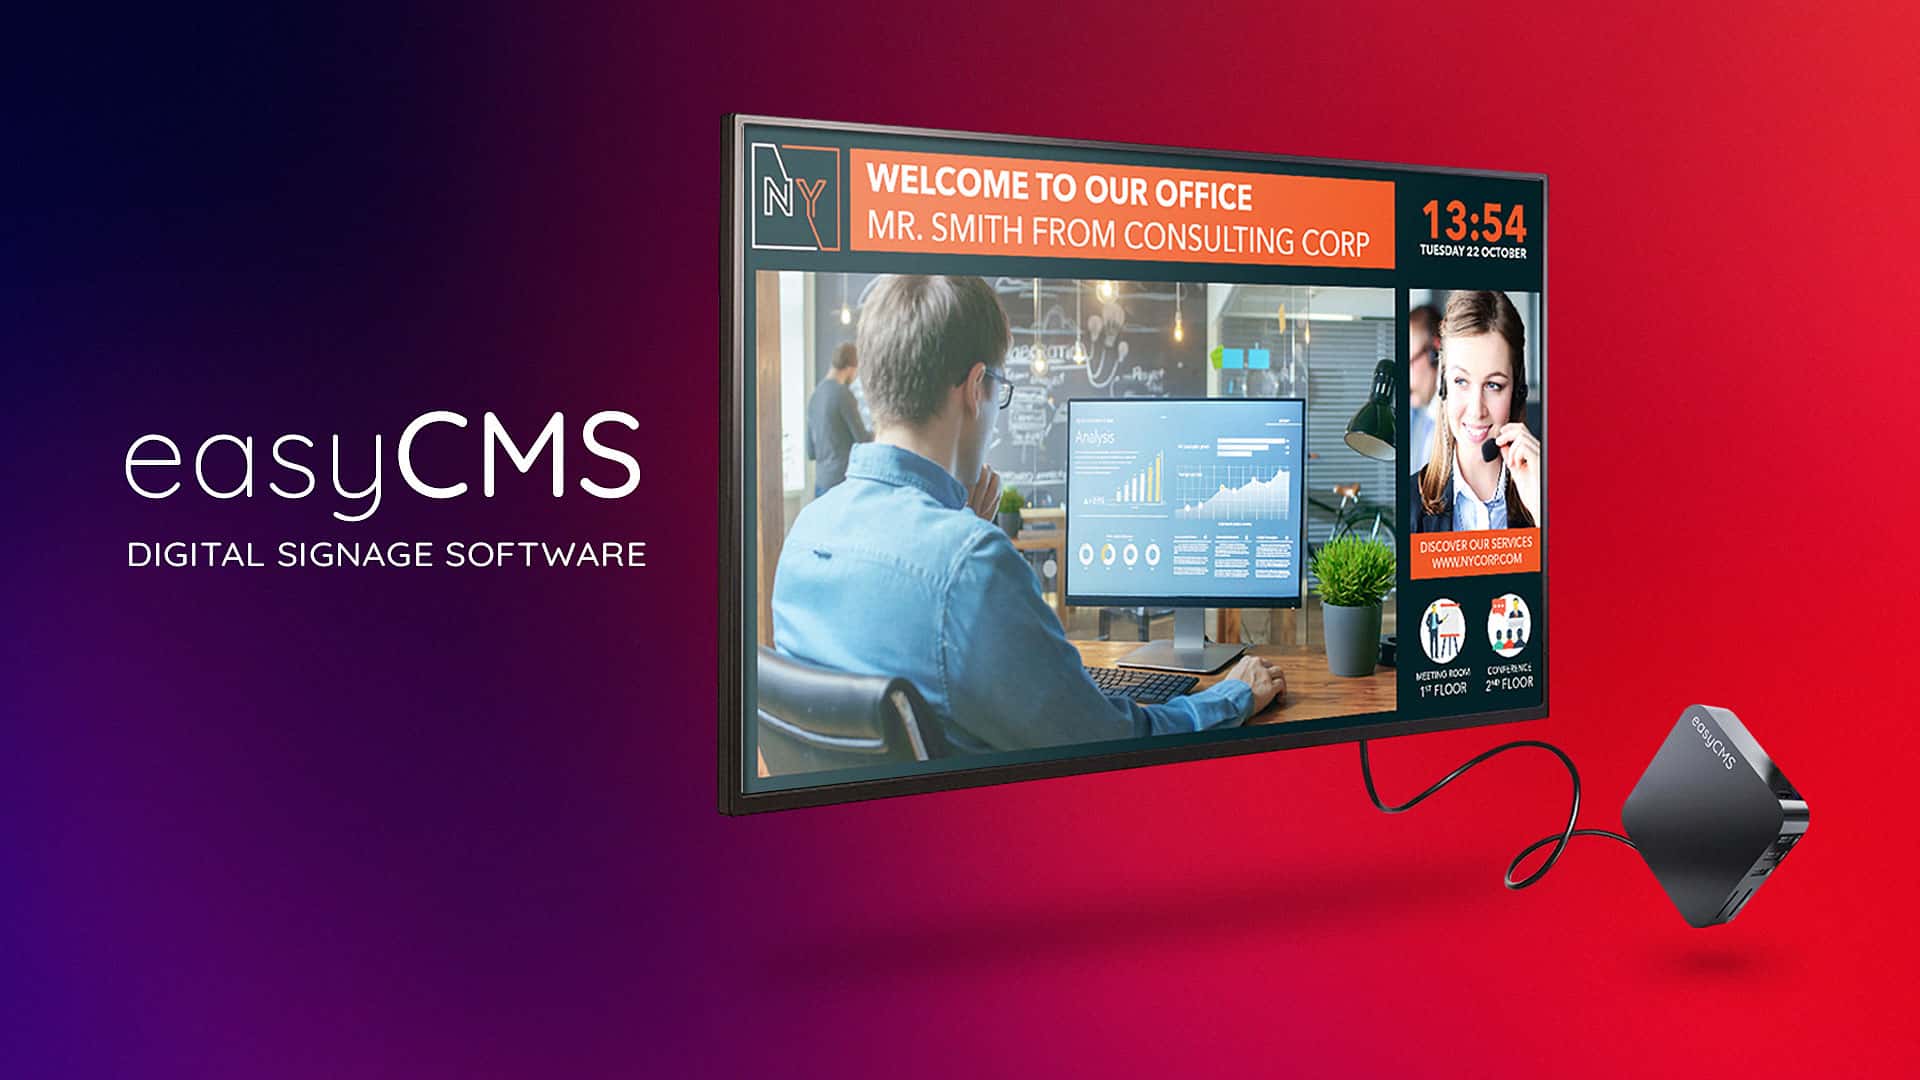 HD Signage Players with Free CMS Signage Software 